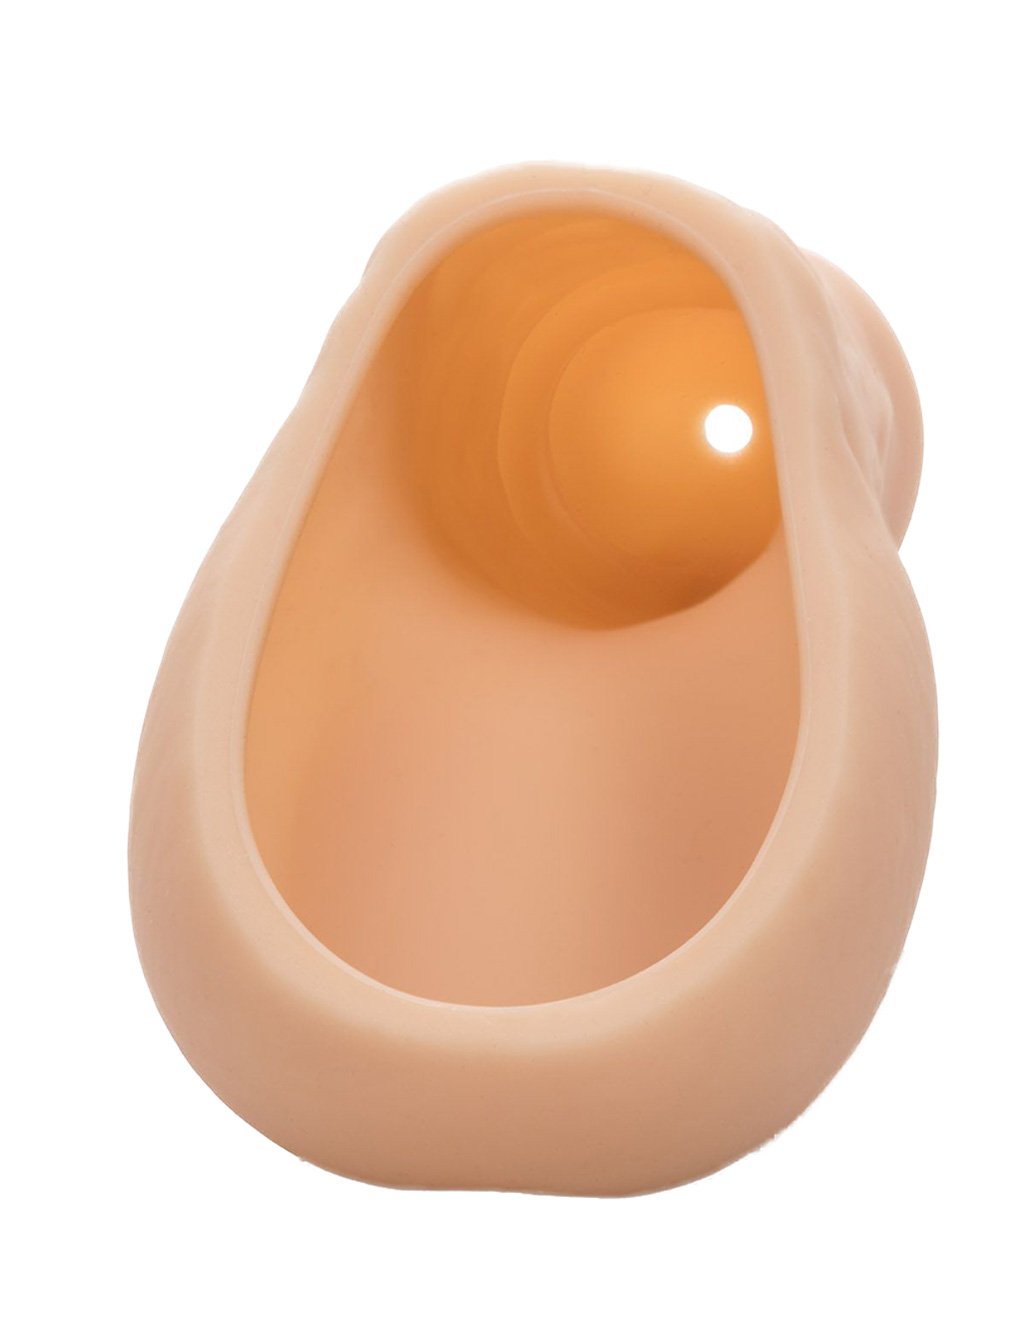 Packer Gear Silicone Hollow Packer Penis- Ivory- Hole